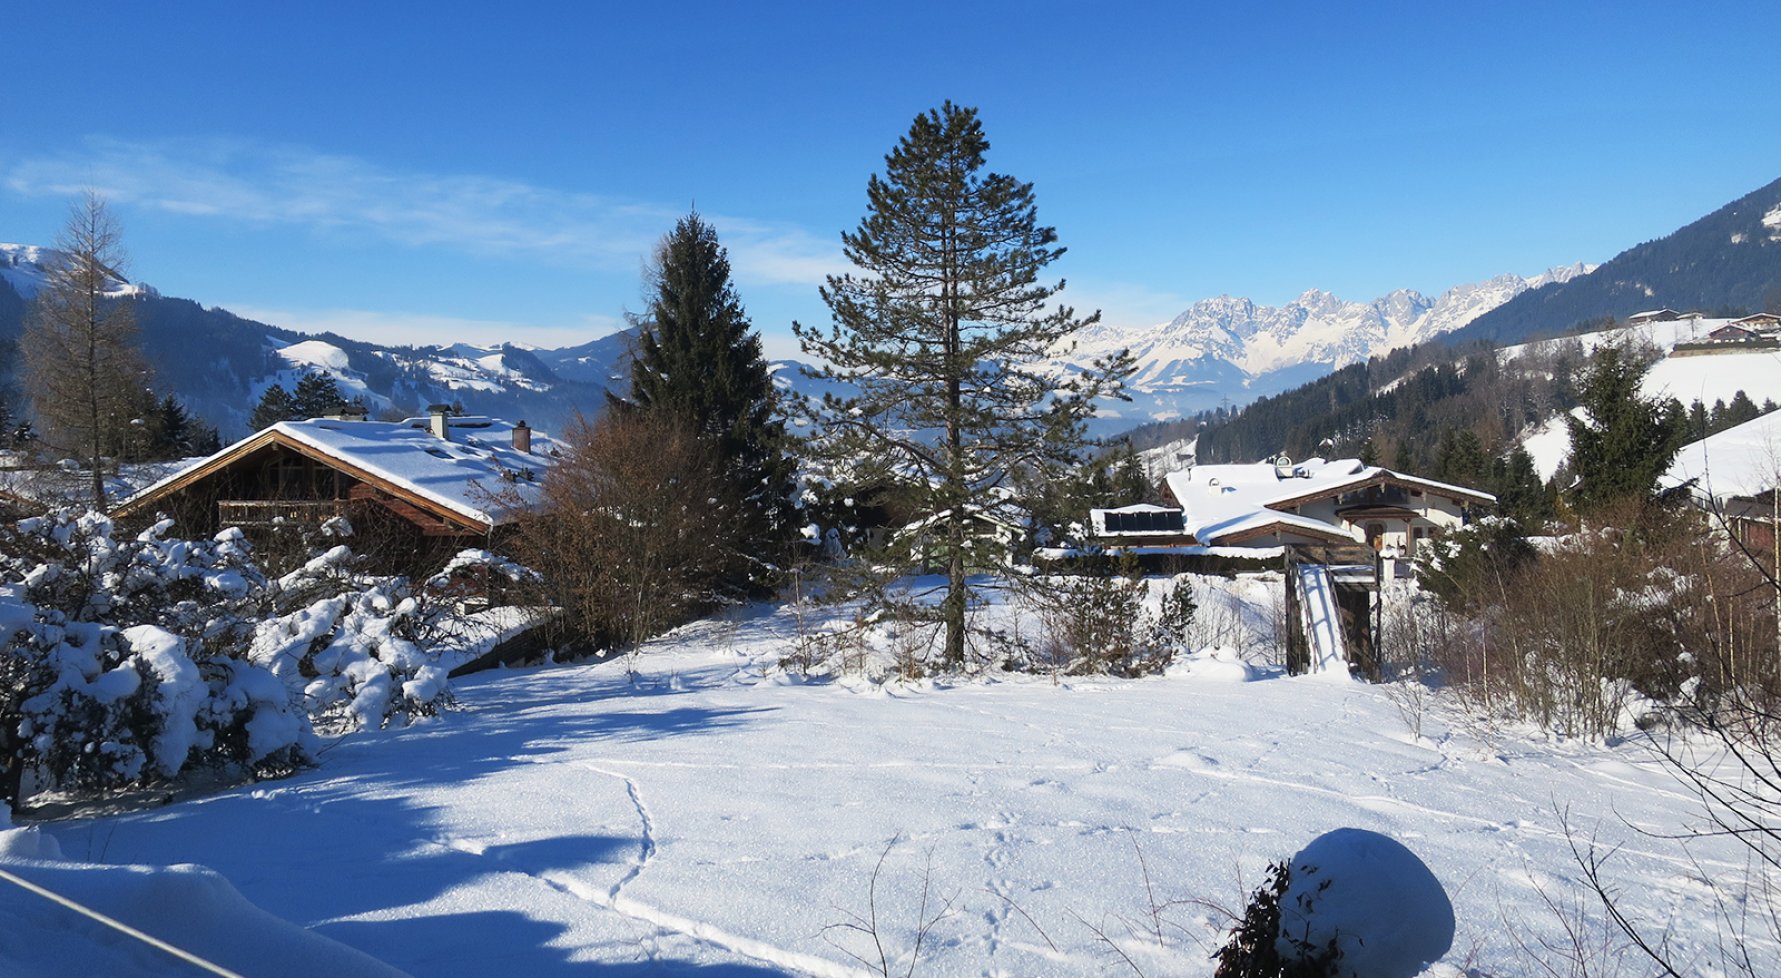 Property in 6370  Kitzbühel: PRIME LOCATION ON BICHLALM-Exclusive villa in panoramic position - picture 1